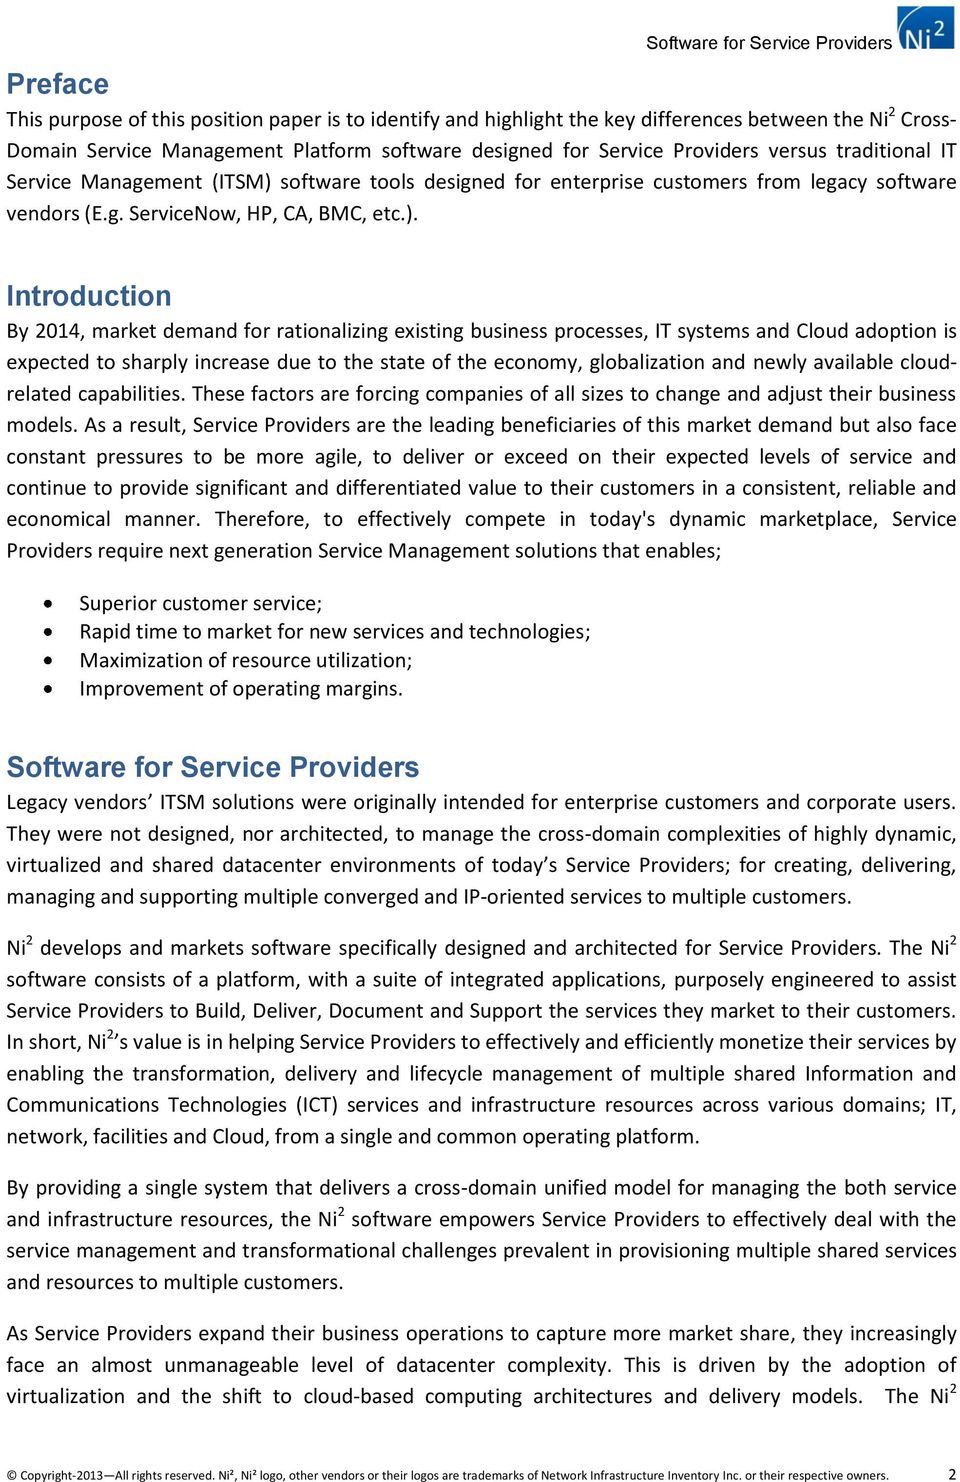 Introduction By 2014, market demand for rationalizing existing business processes, IT systems and Cloud adoption is expected to sharply increase due to the state of the economy, globalization and